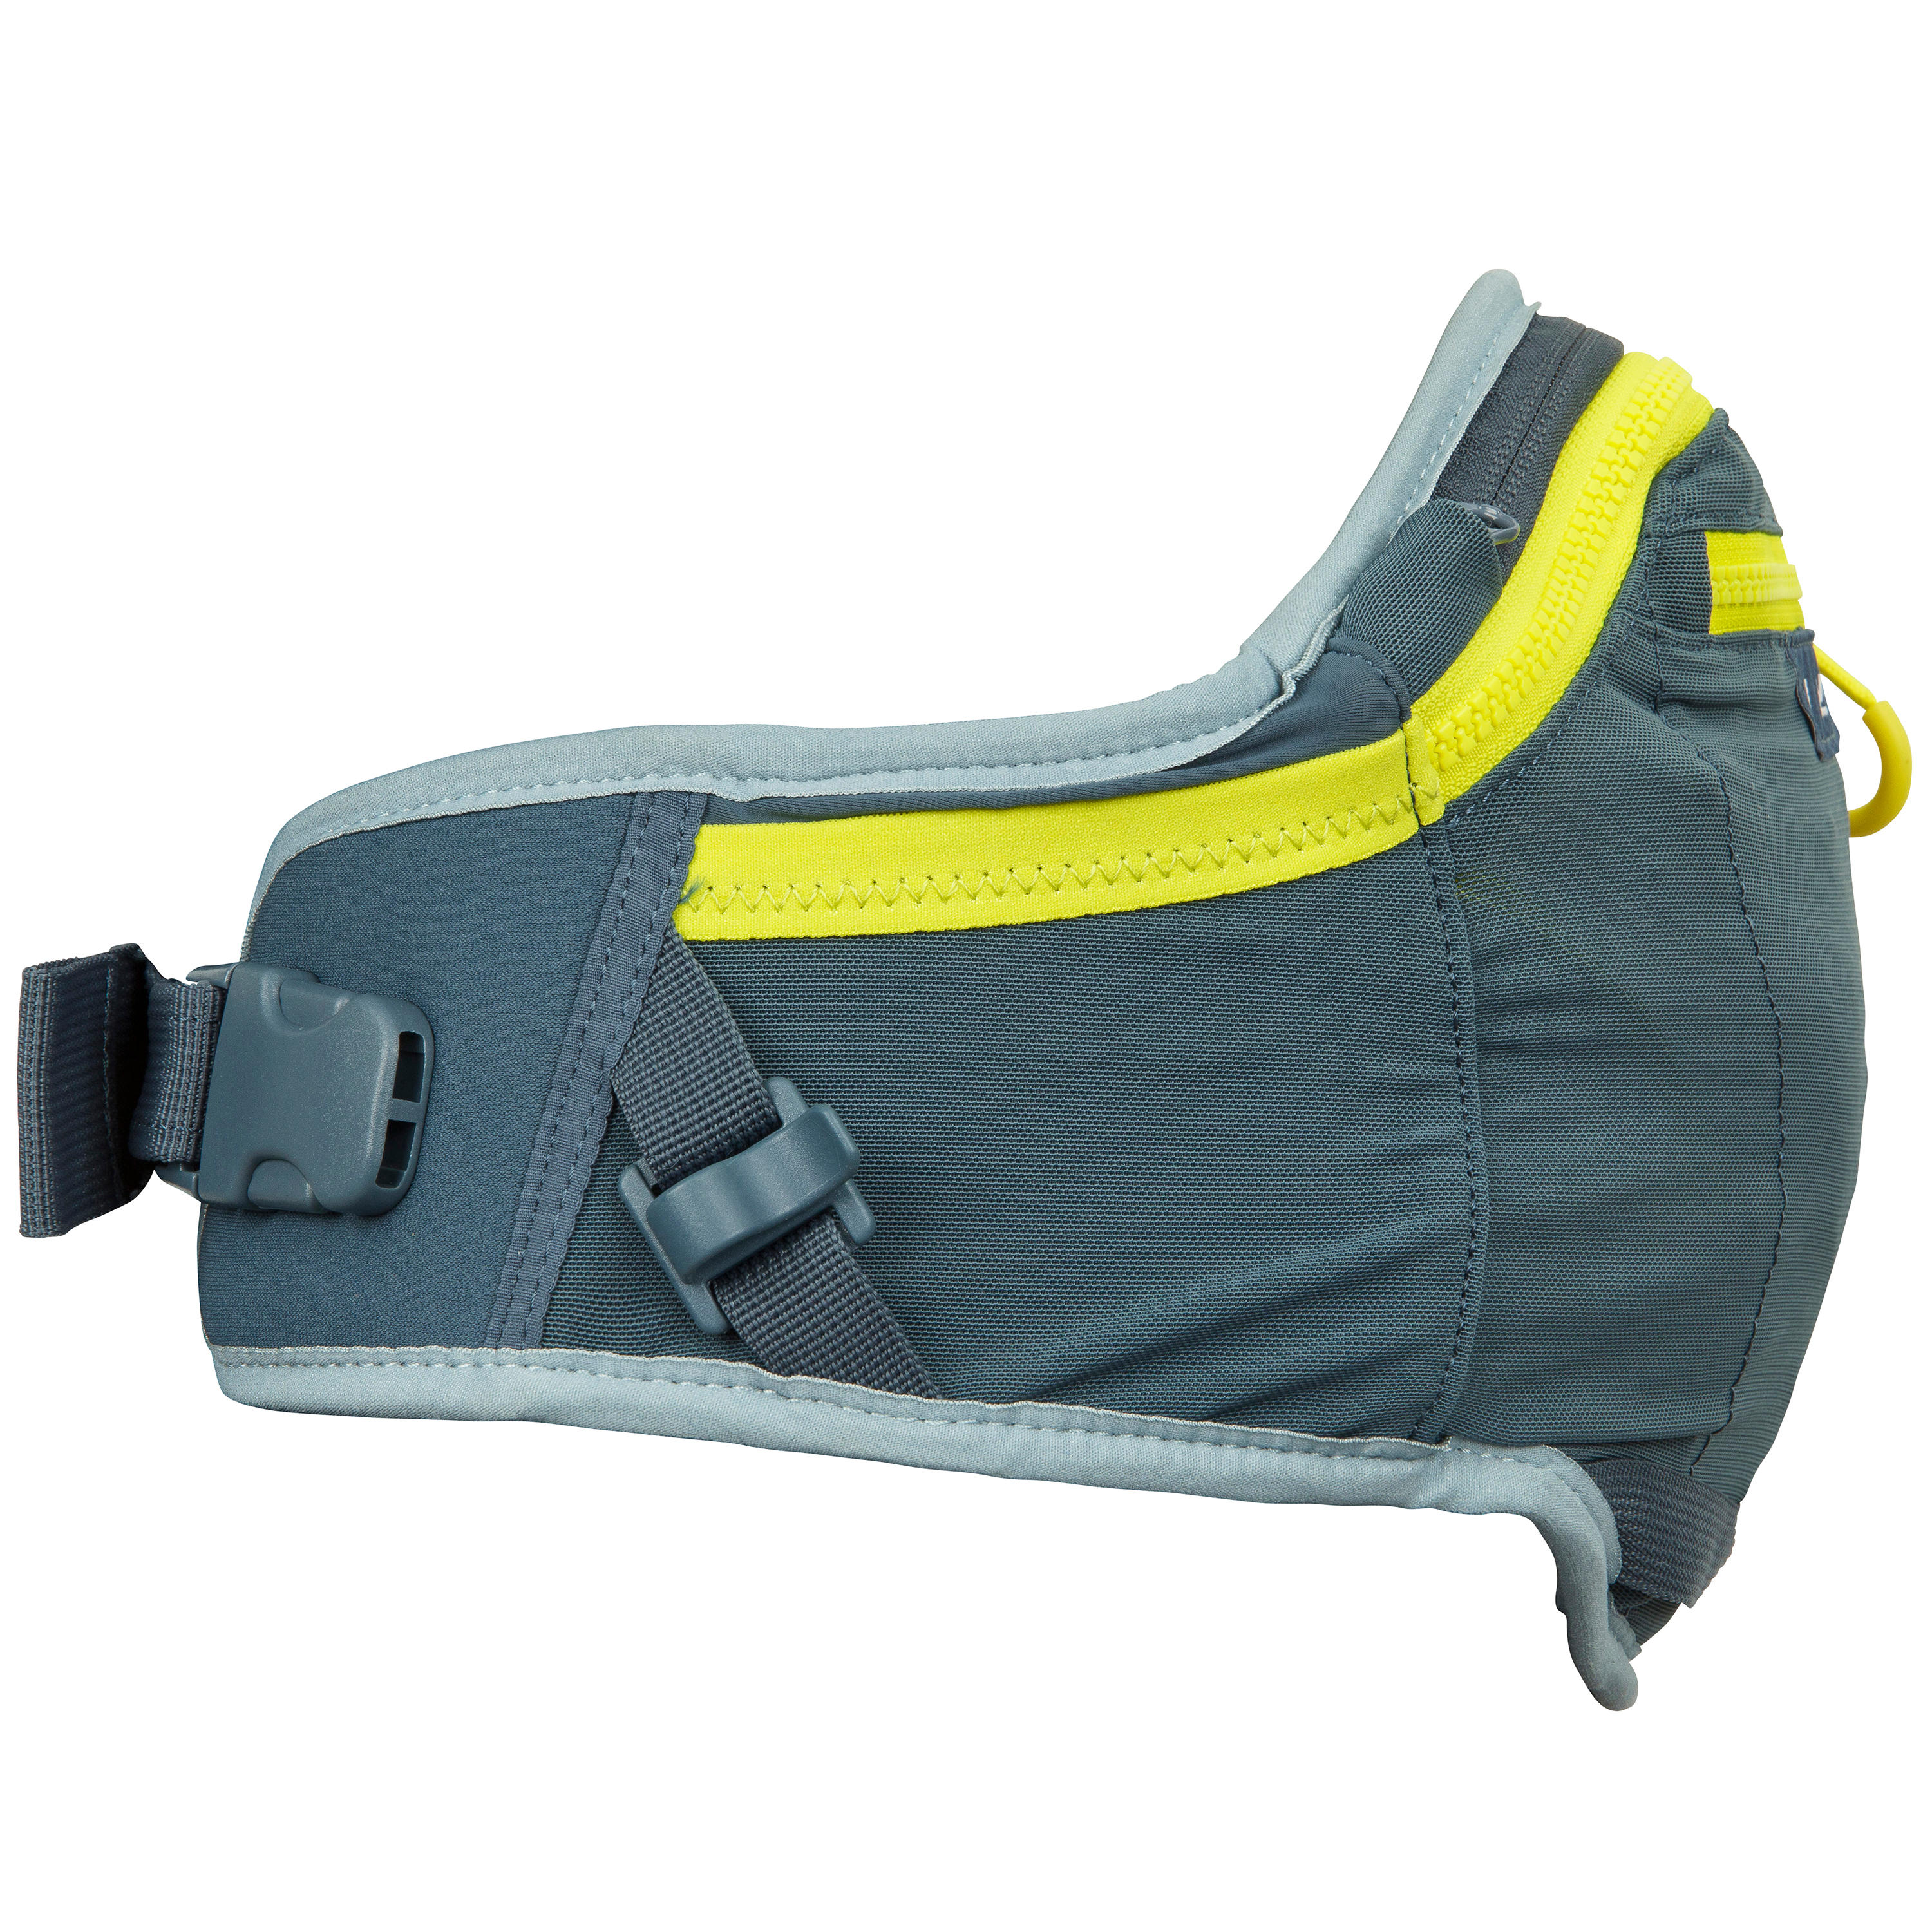 1.5 Litre Hydration Belt For Stand-Up Paddle Racing 9/19